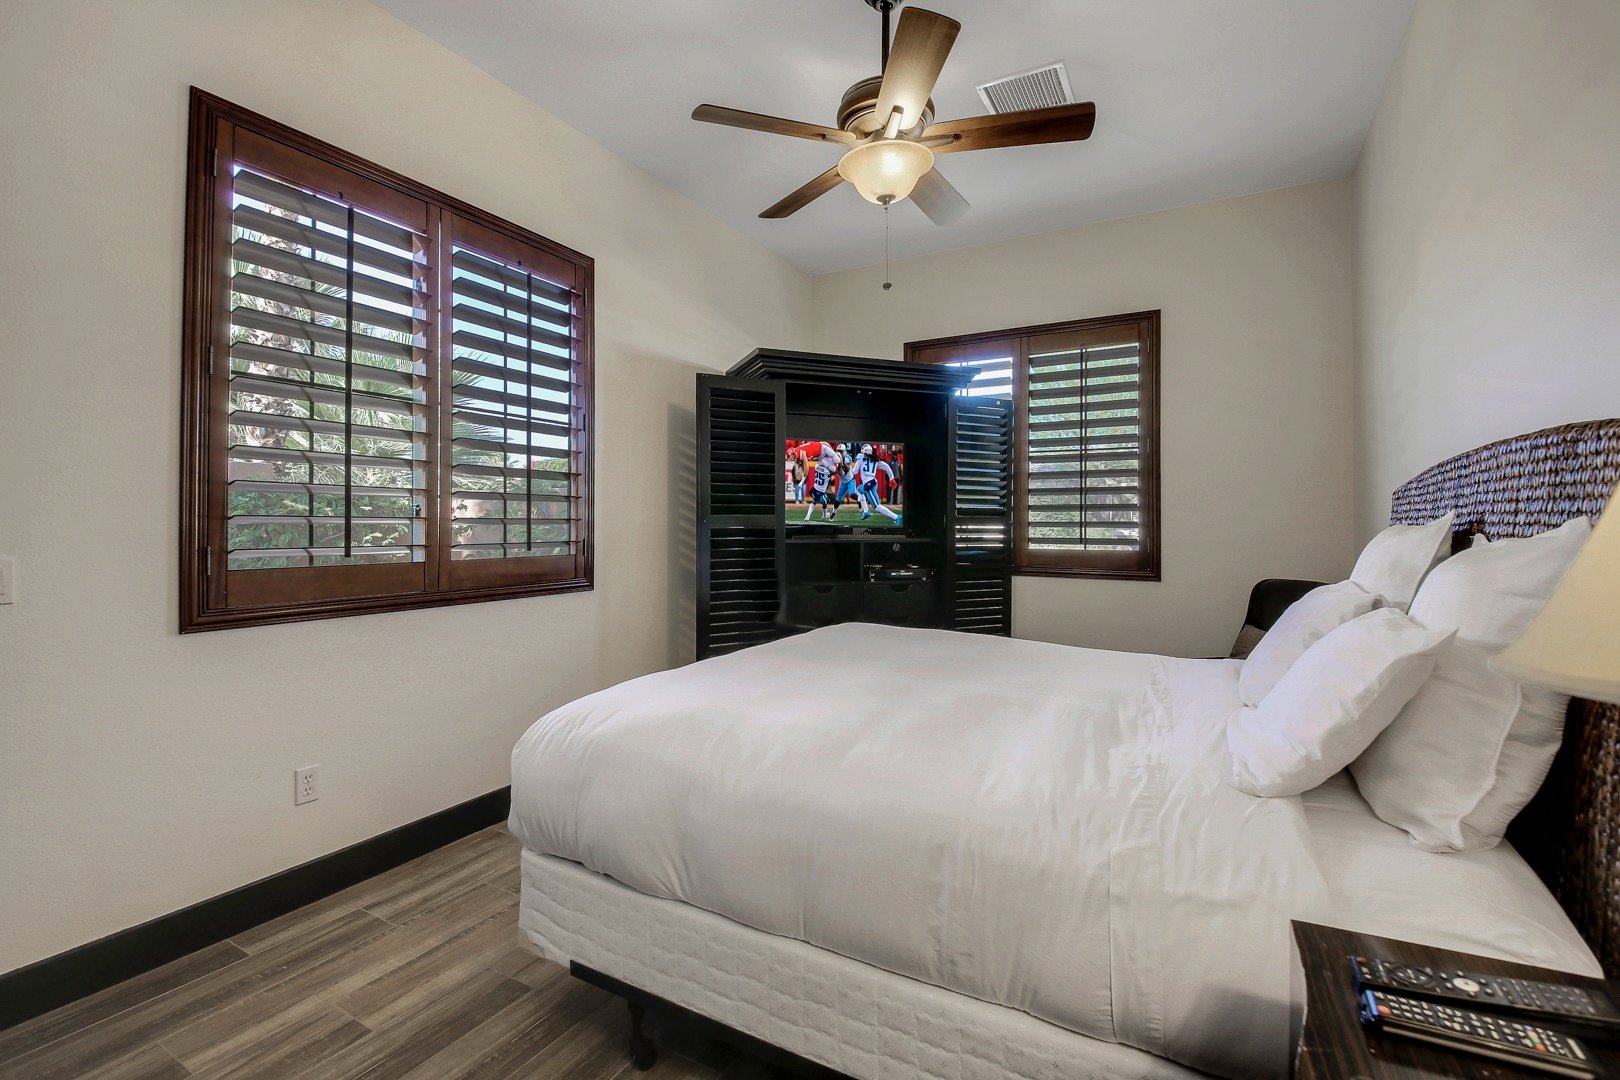 Enjoy the HDTV, switch-controlled ceiling fan, with access to the front courtyard.